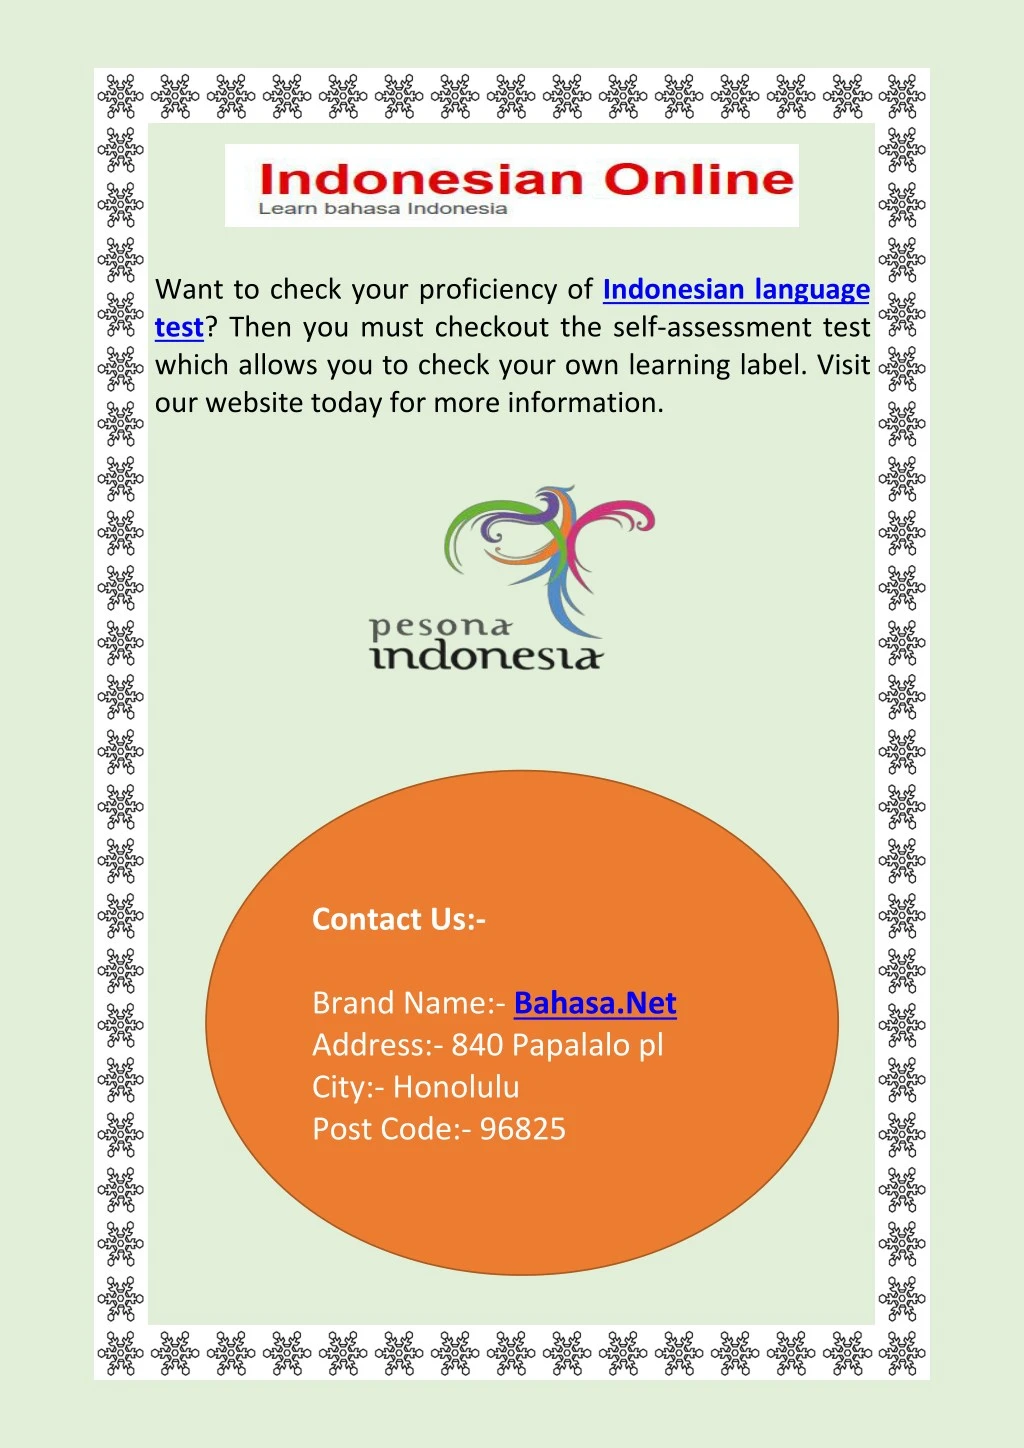 want to check your proficiency of indonesian